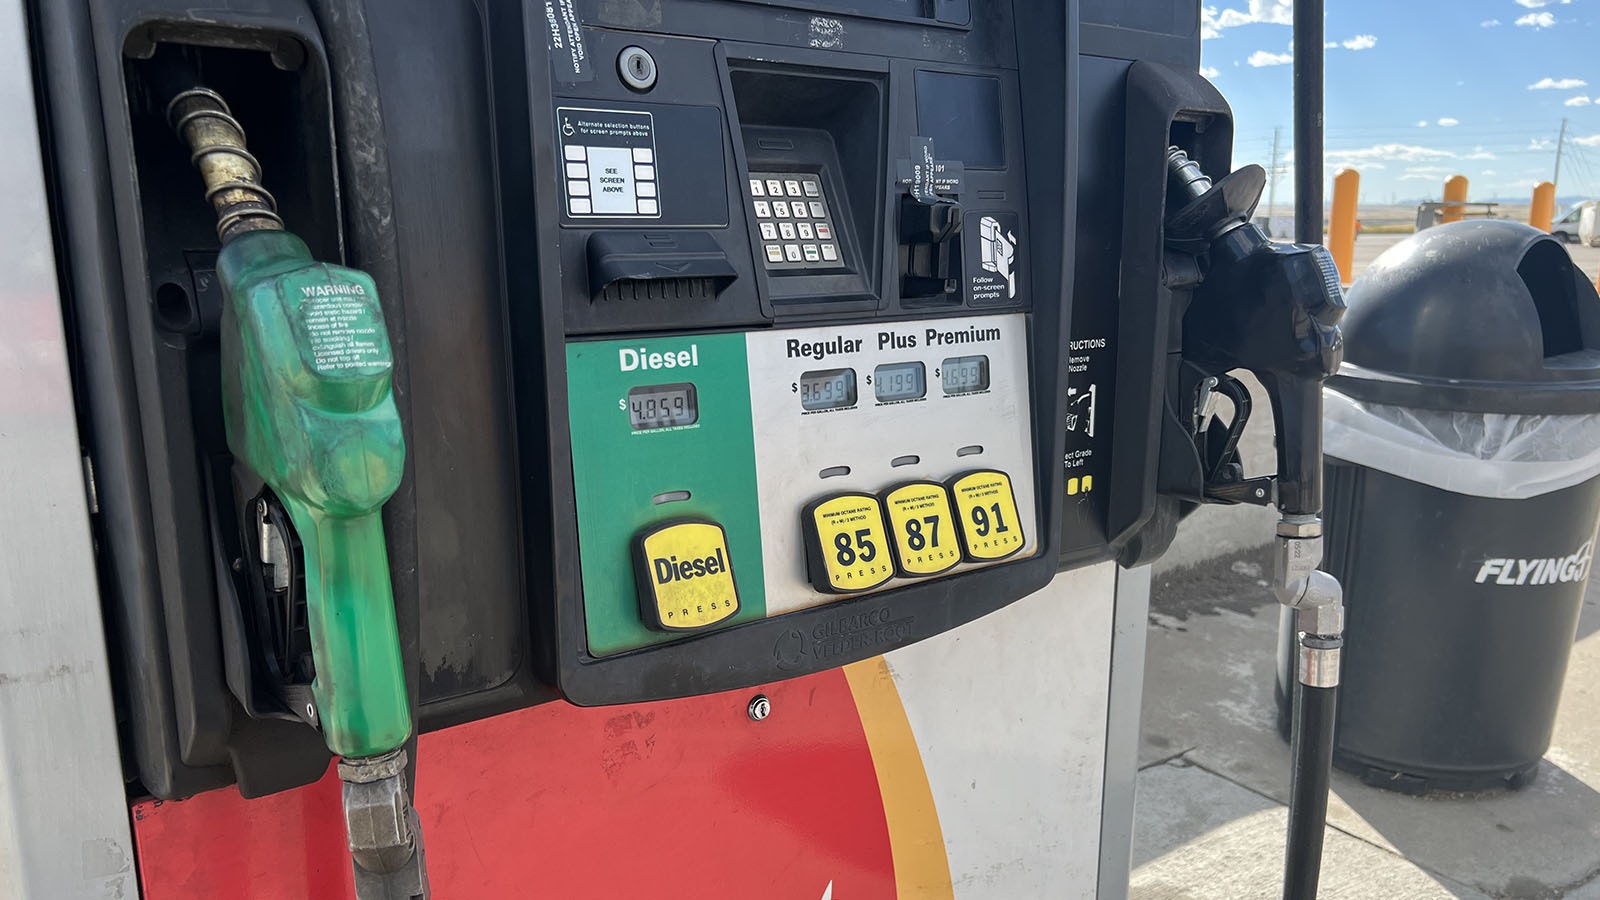 Wyoming lawmakers are considering increasing the tax on diesel fuel by 5 cents a gallon and gasoline by 2 cents.